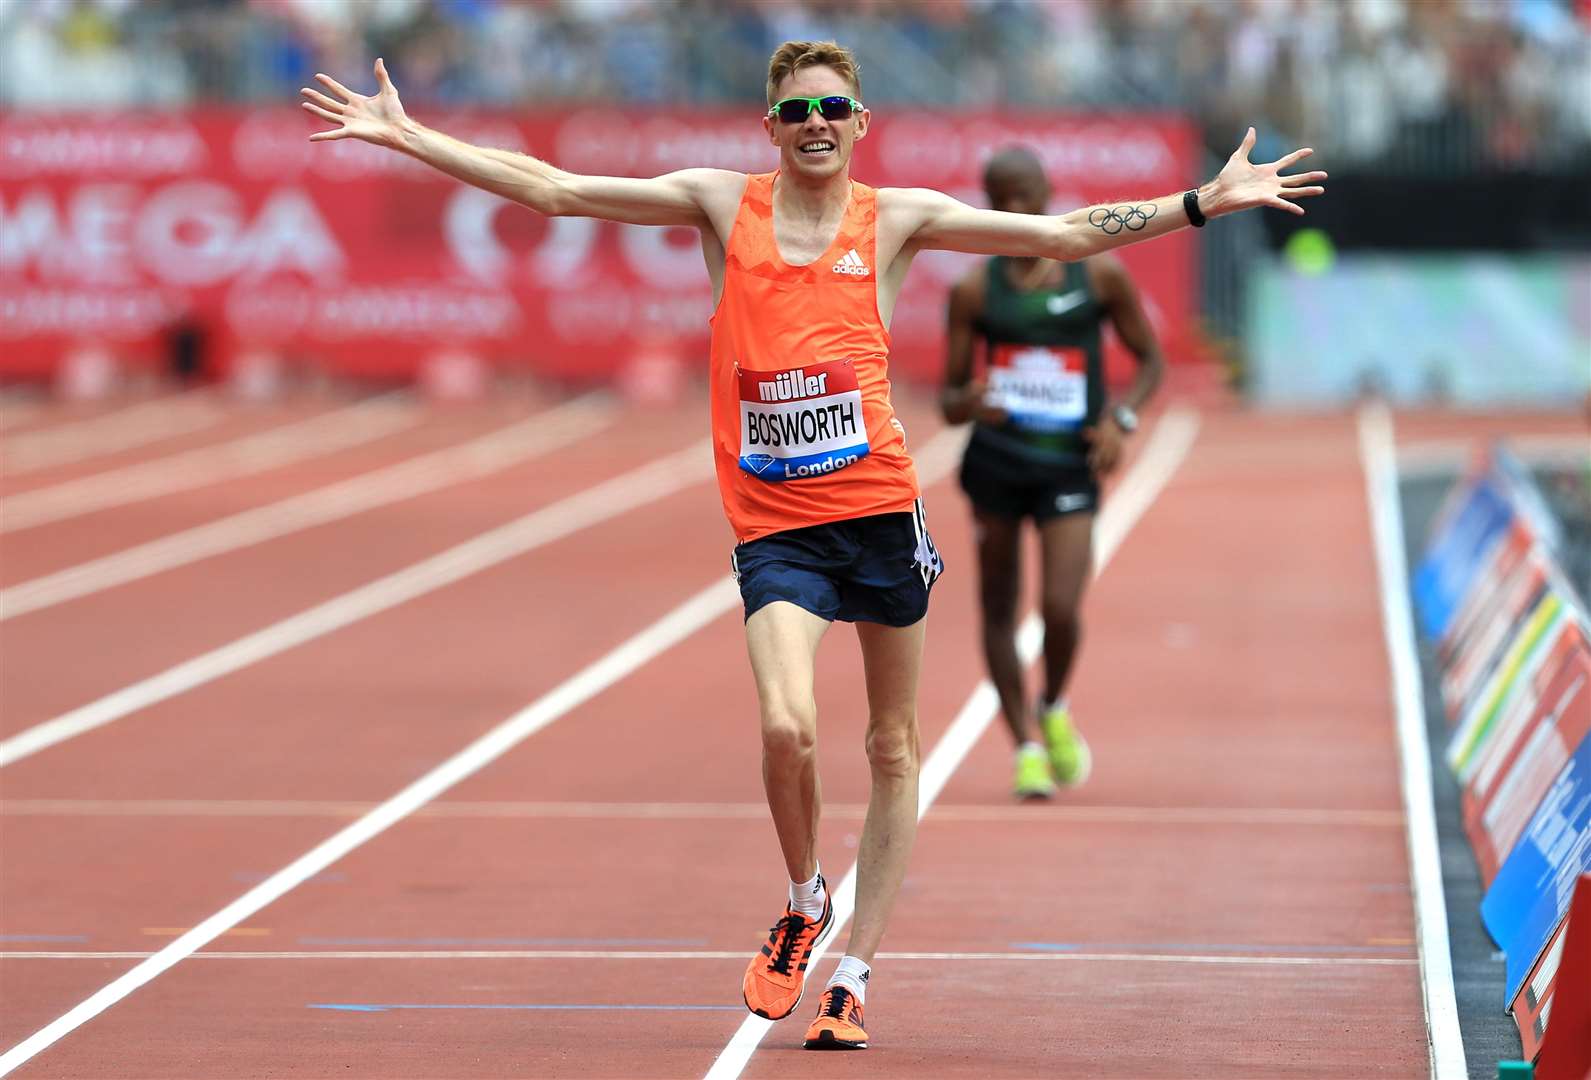 Tom Bosworth celebrates victory in the Men's 3000M Walk Race during Day One of the Muller Anniversary Games at London Stadium Picture: Stephen Pond - British Athletics/British Athletics via Getty Images